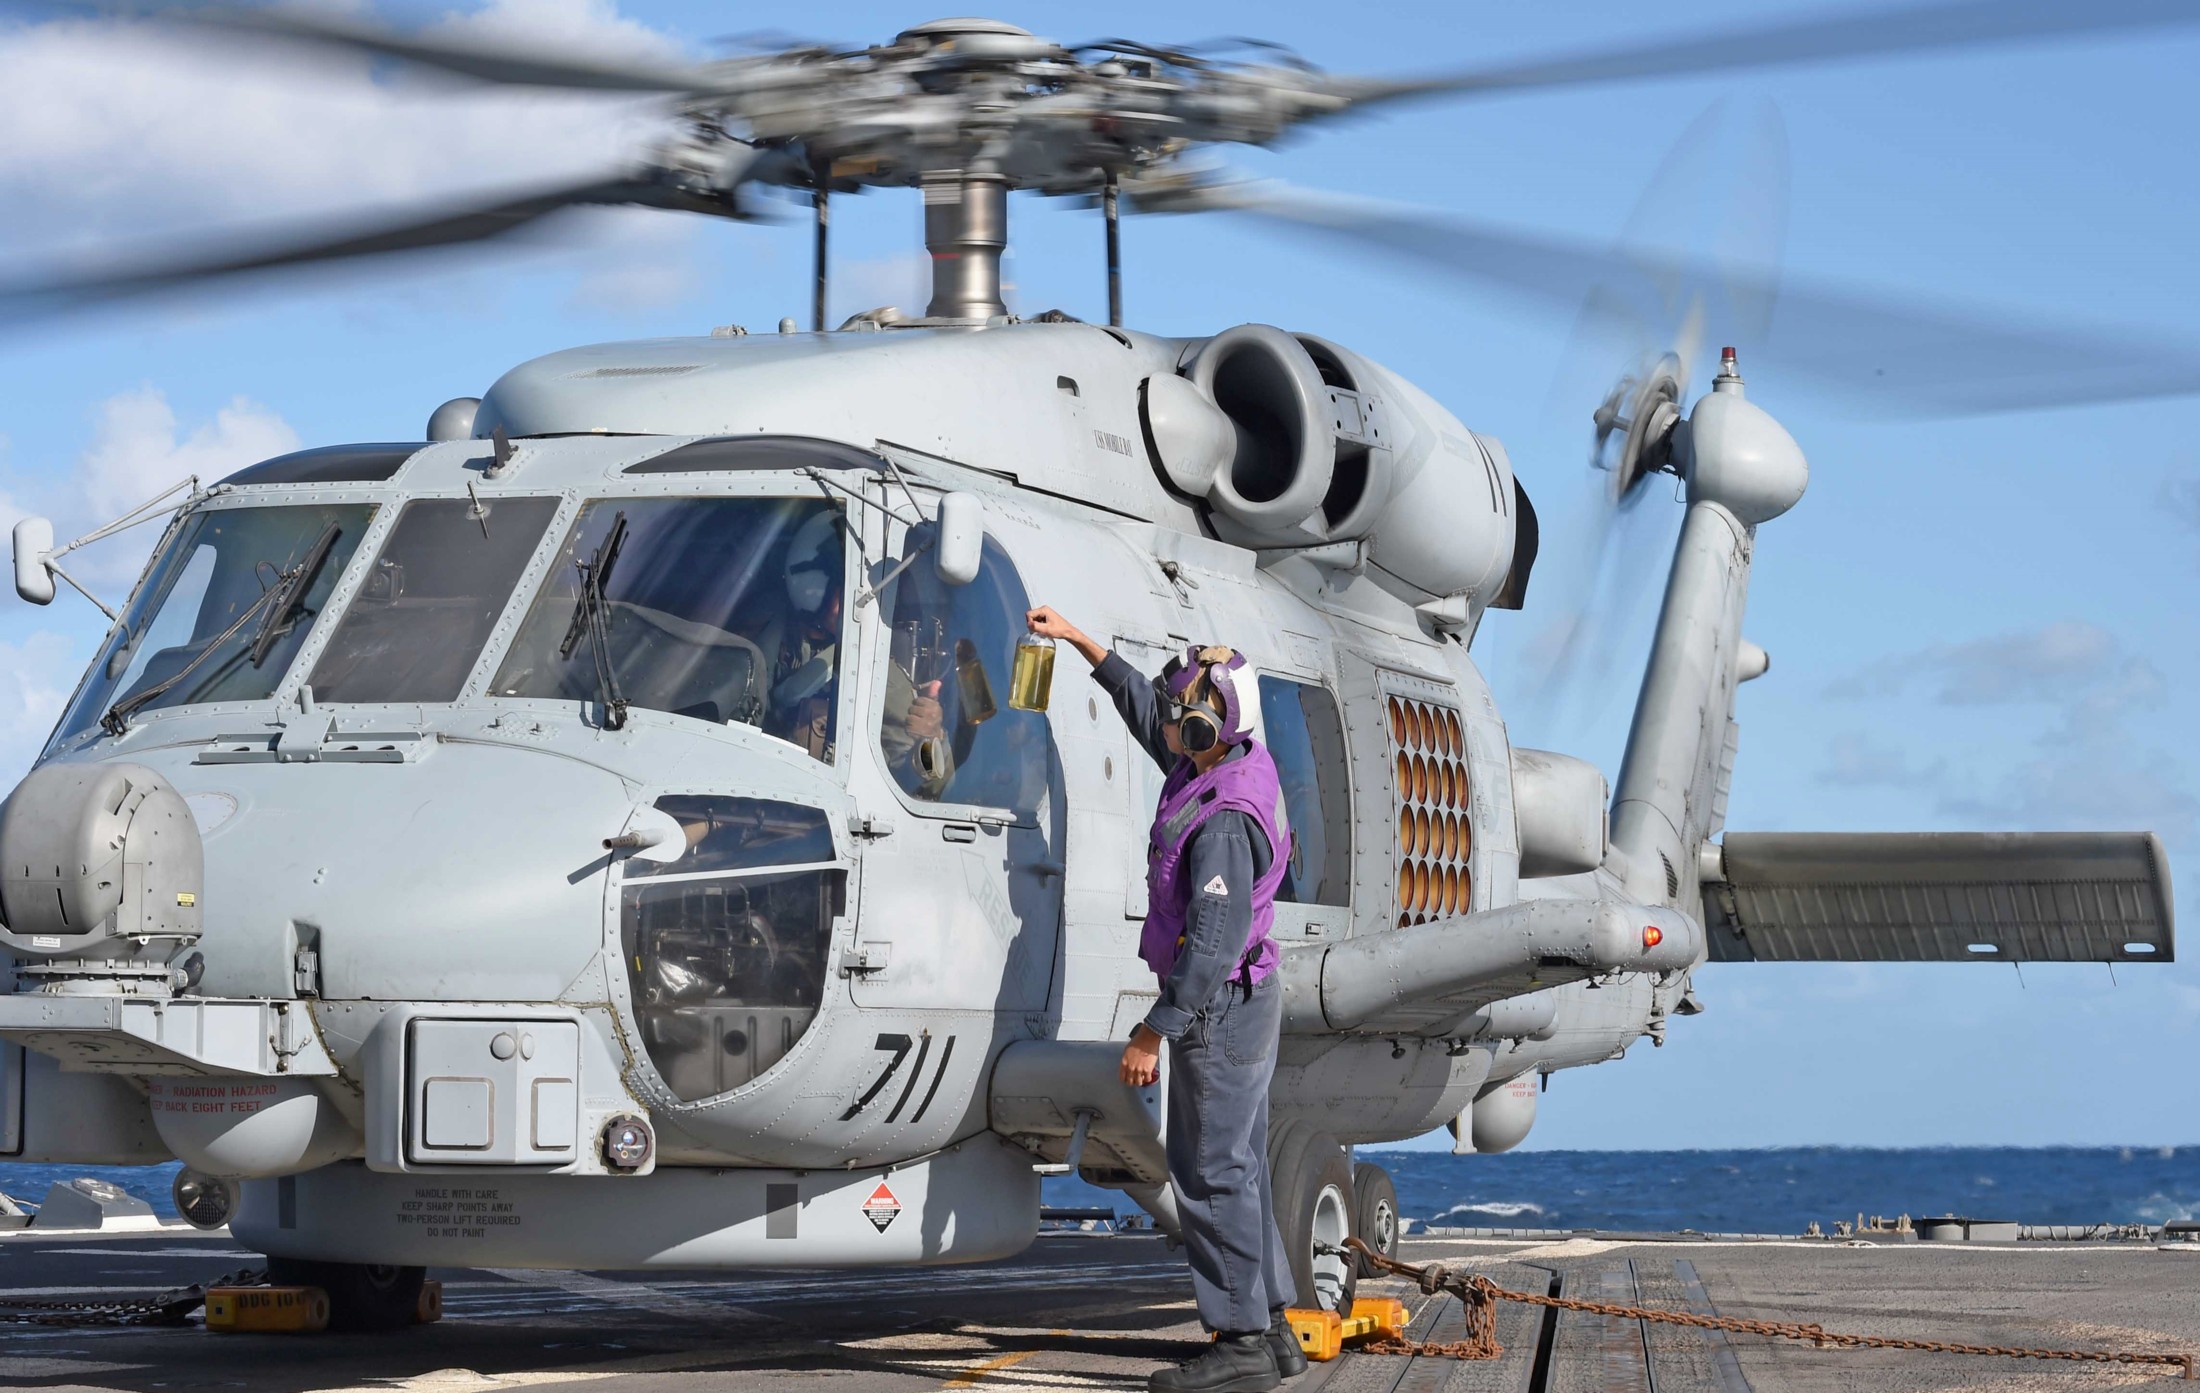 hsm-71 raptors helicopter maritime strike squadron mh-60r seahawk navy 2015 11